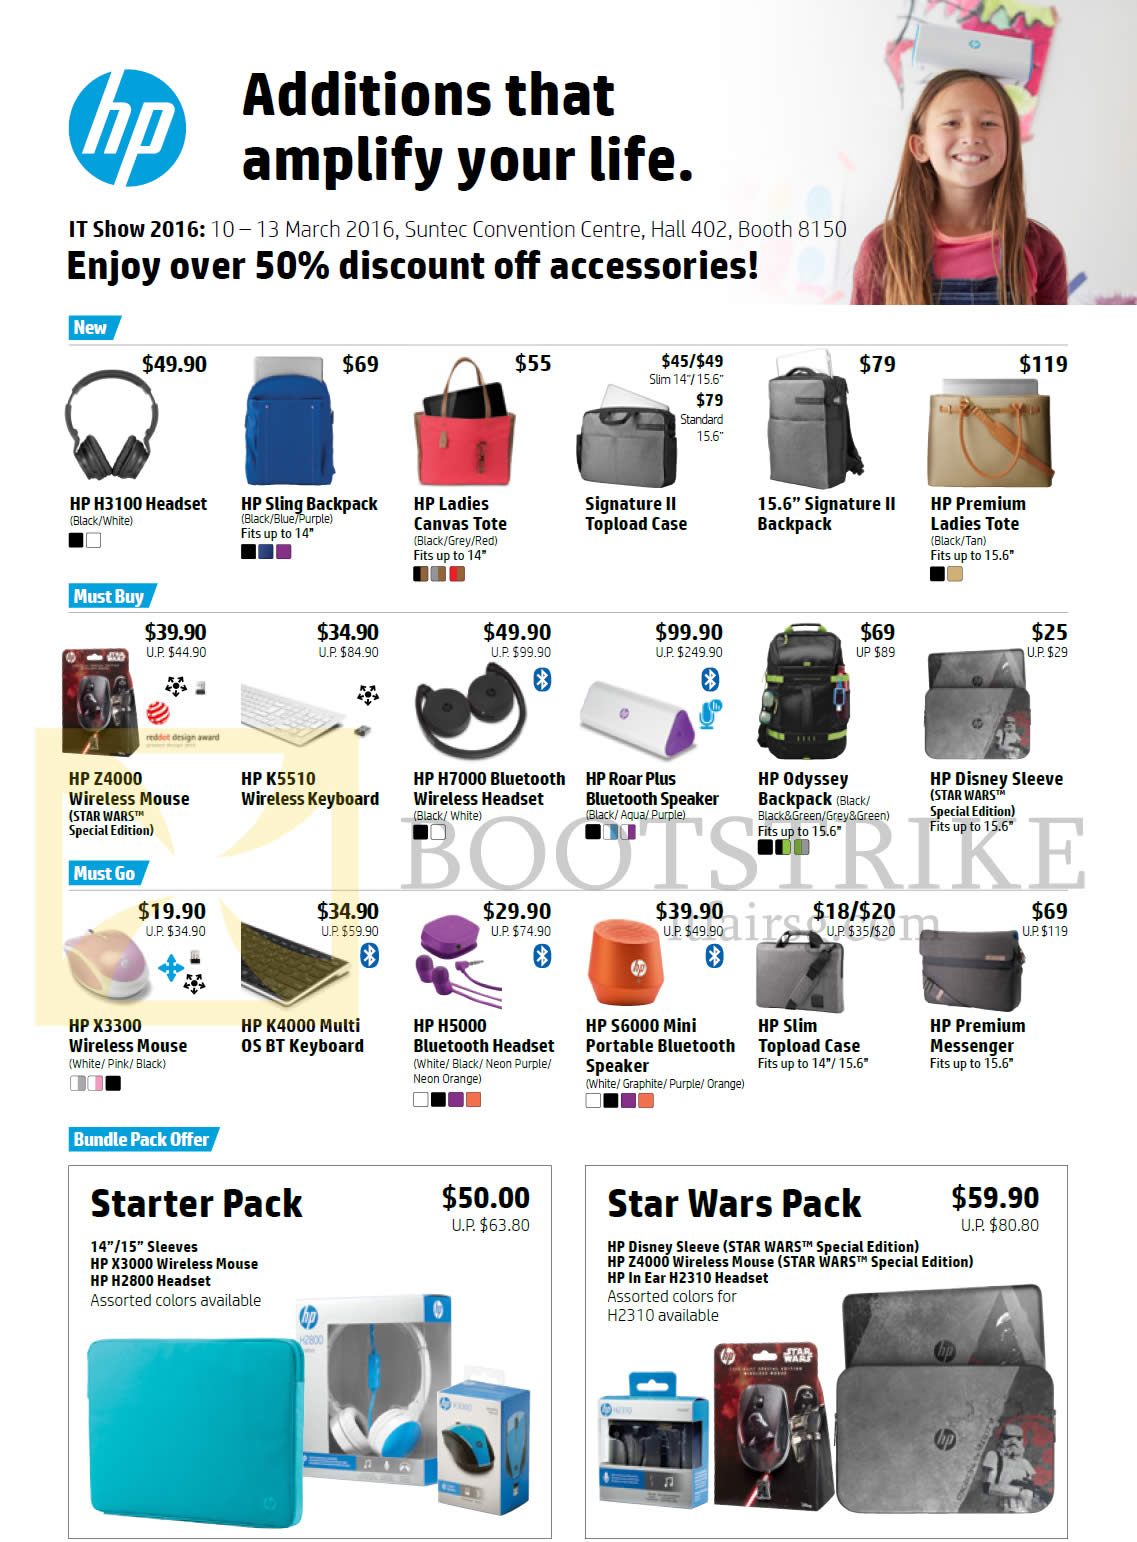 IT SHOW 2016 price list image brochure of HP Accessories Headset, Backpacks, Wireless Mouse, Keyboard, Case, Bluetooth Speaker, Messenger, Sleeve, Canvas Tote